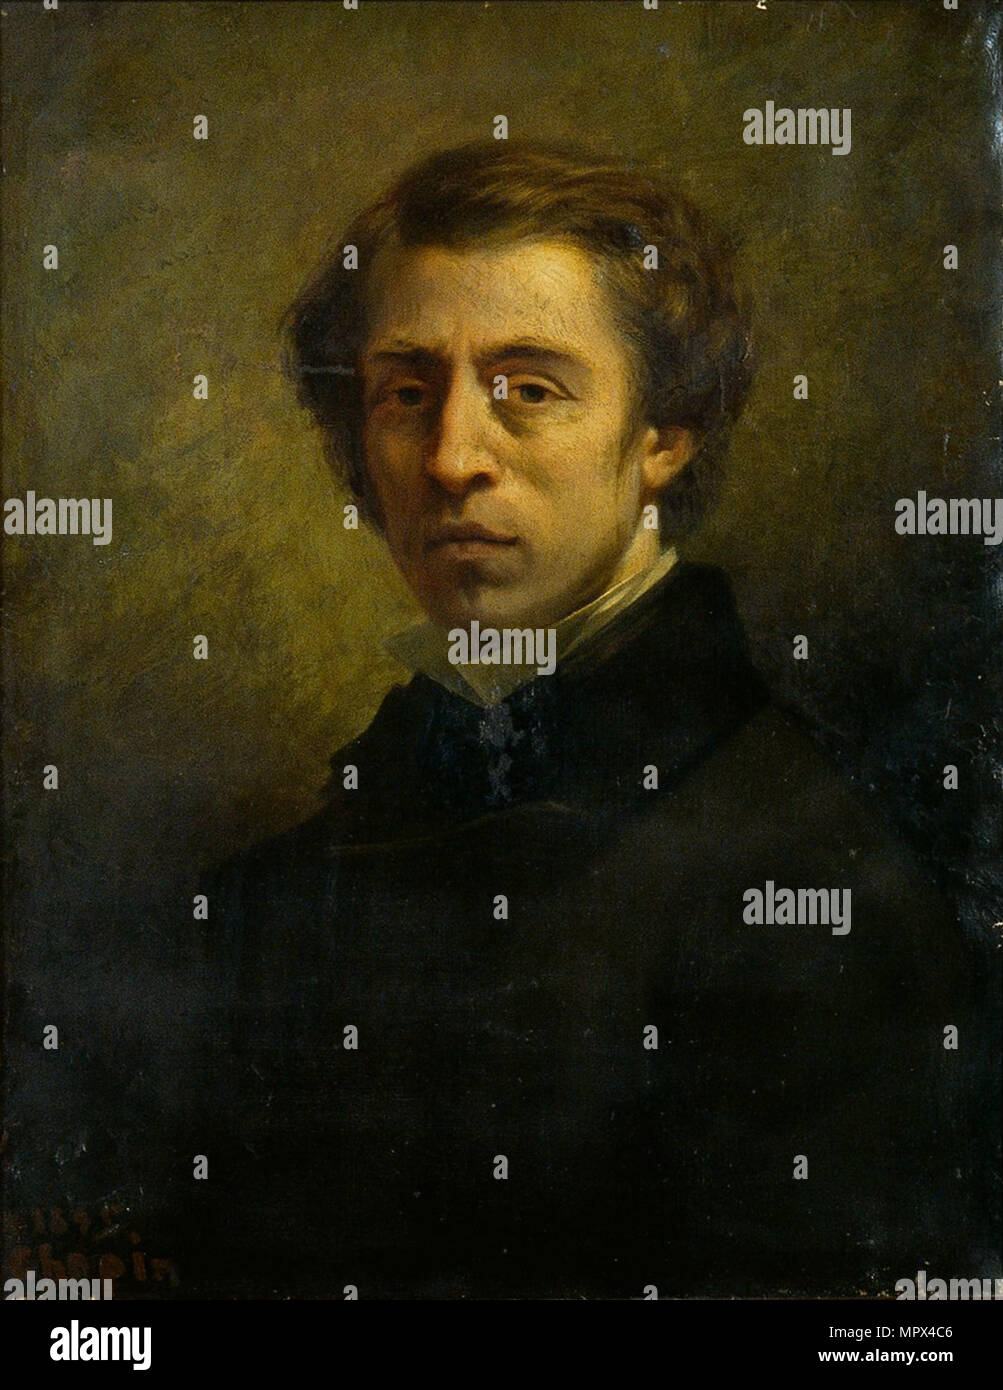 Portrait of the composer Frédéric Chopin (1810-1849), 1856. Stock Photo